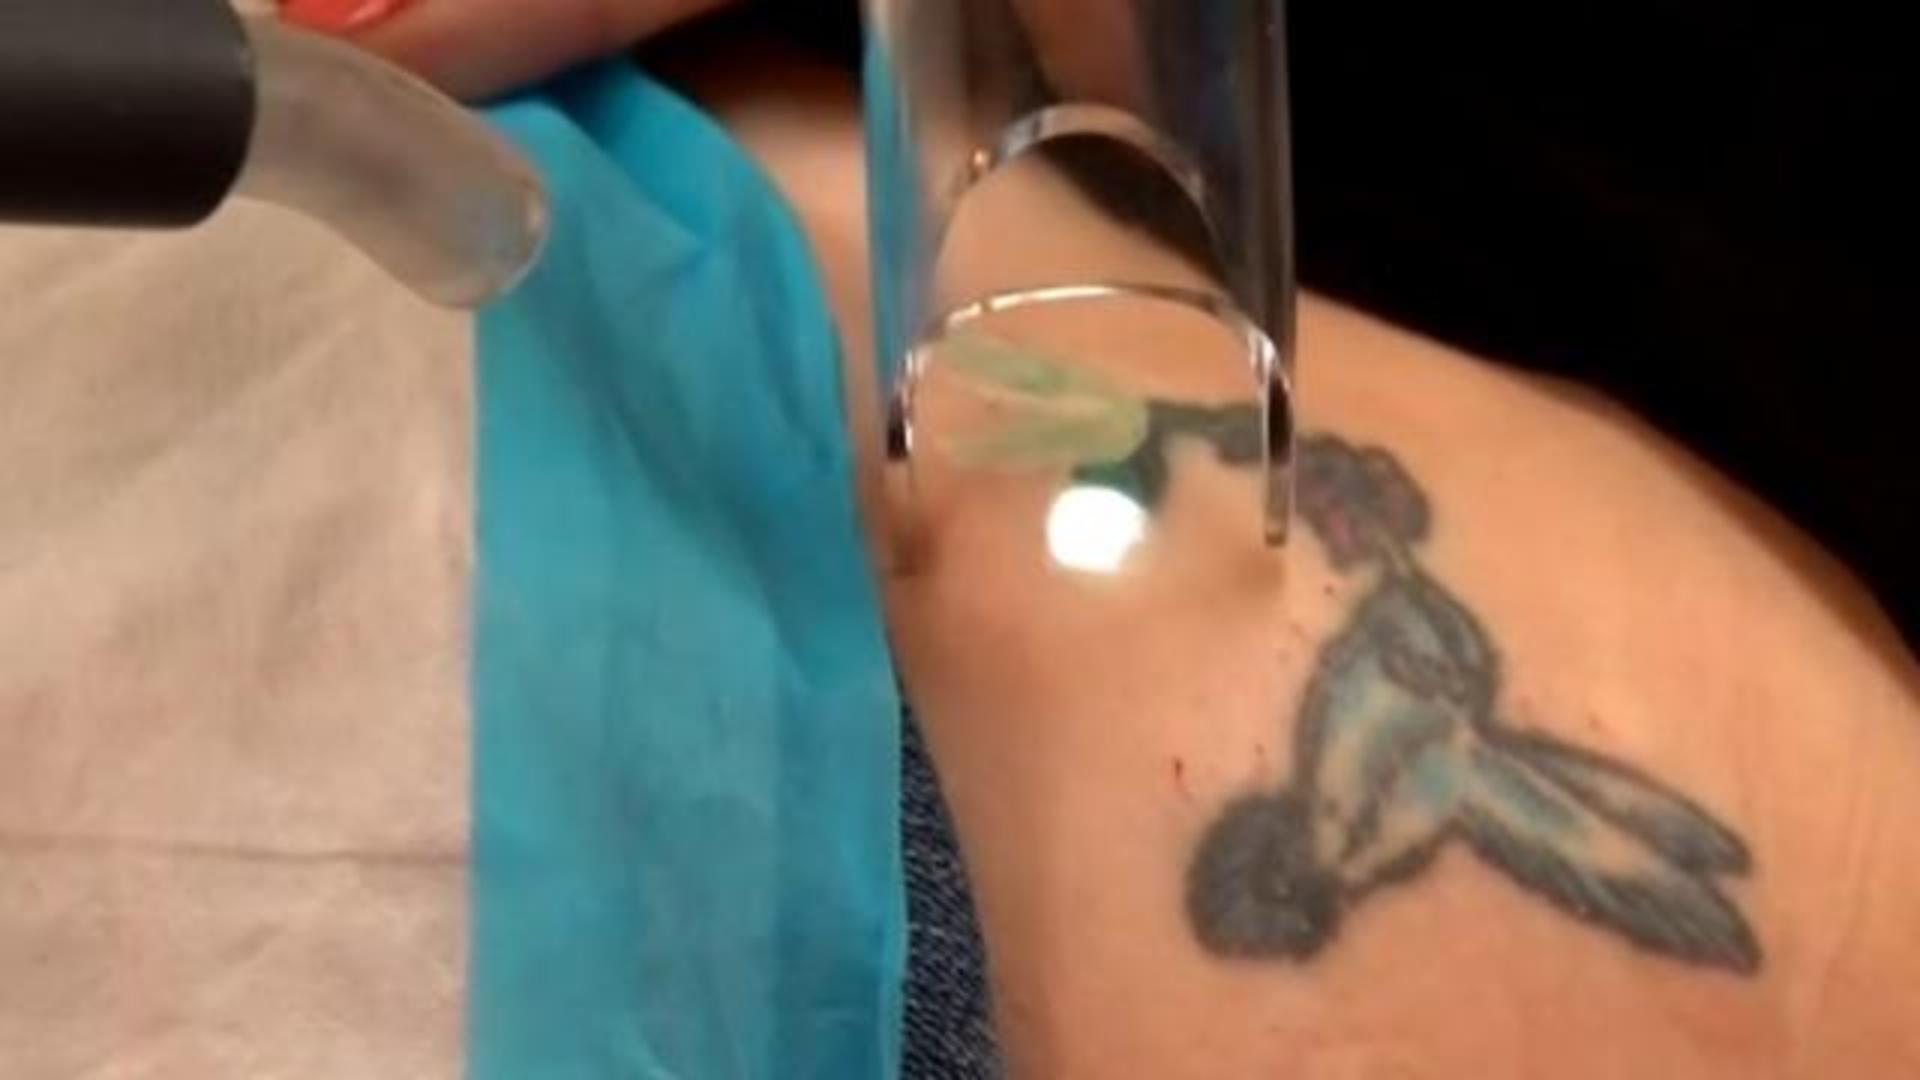 Exgang member escapes troubled past through tattoo removal  abc10com